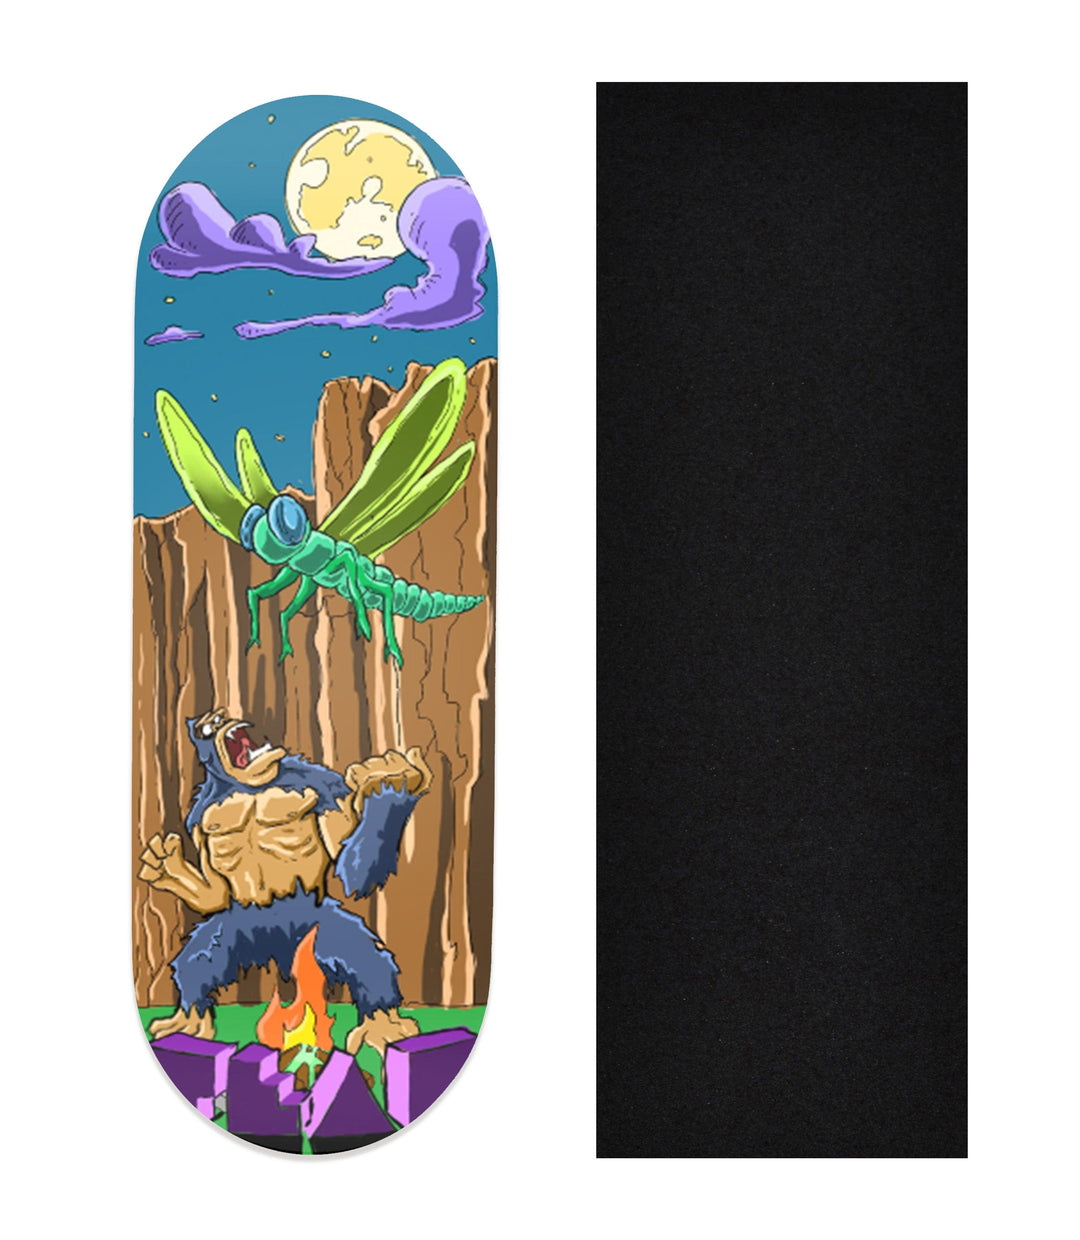 Teak Tuning Heat Transfer Graphic Wooden Fingerboard Deck, "Angry Ape" 32mm Deck